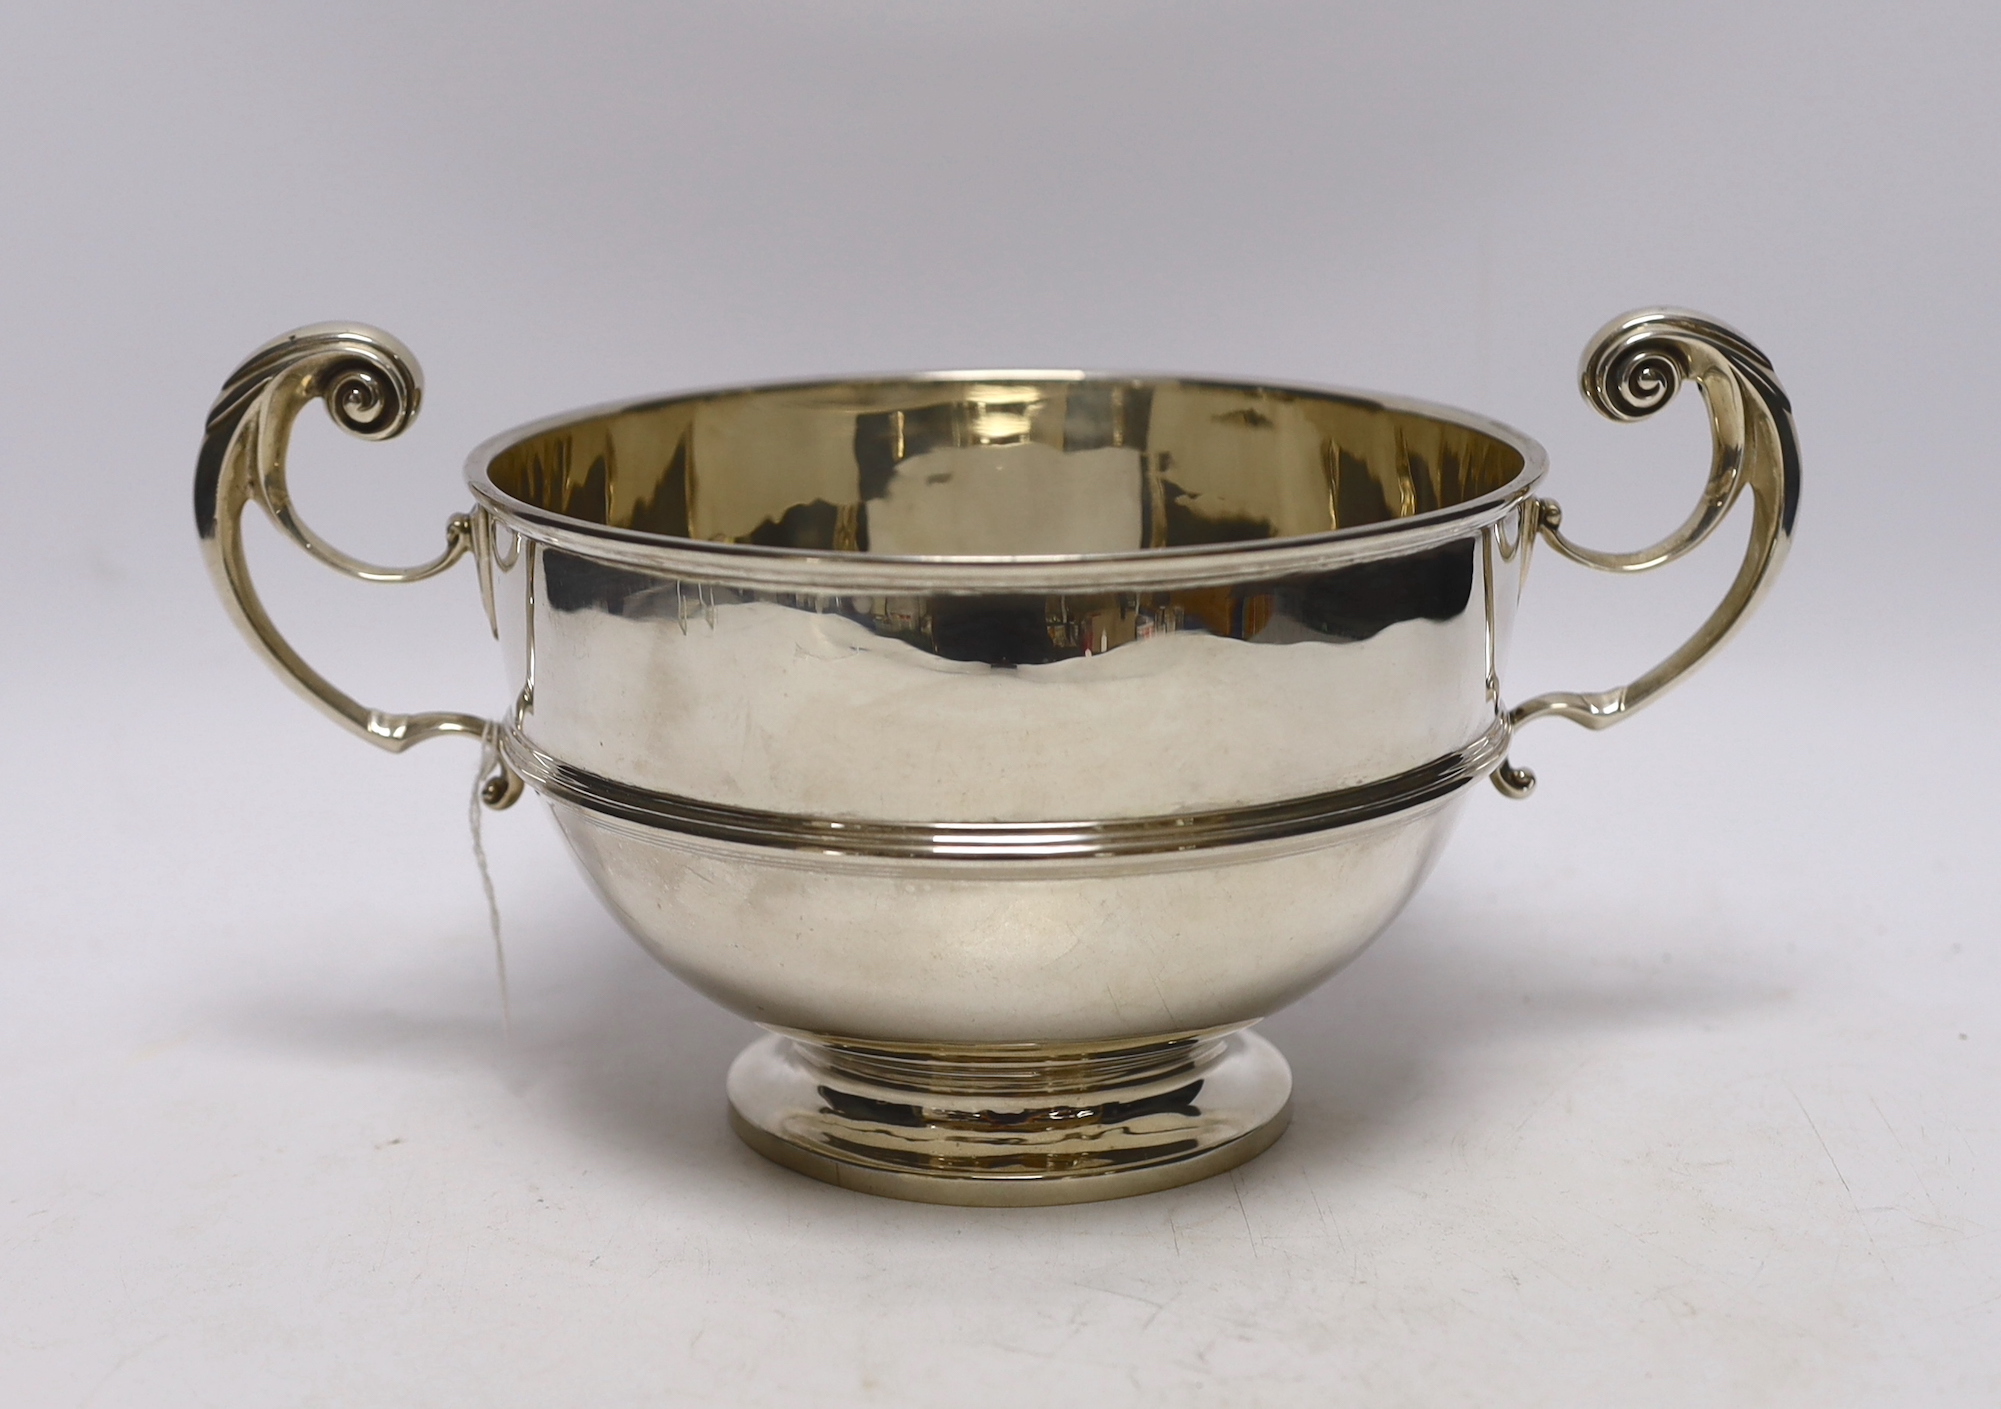 An Edwardian silver two handled bowl, with banded girdle, Goldsmiths & Silversmiths Co Ltd, London, 1908, 27cm over handles, 18.5oz.                                                                                        